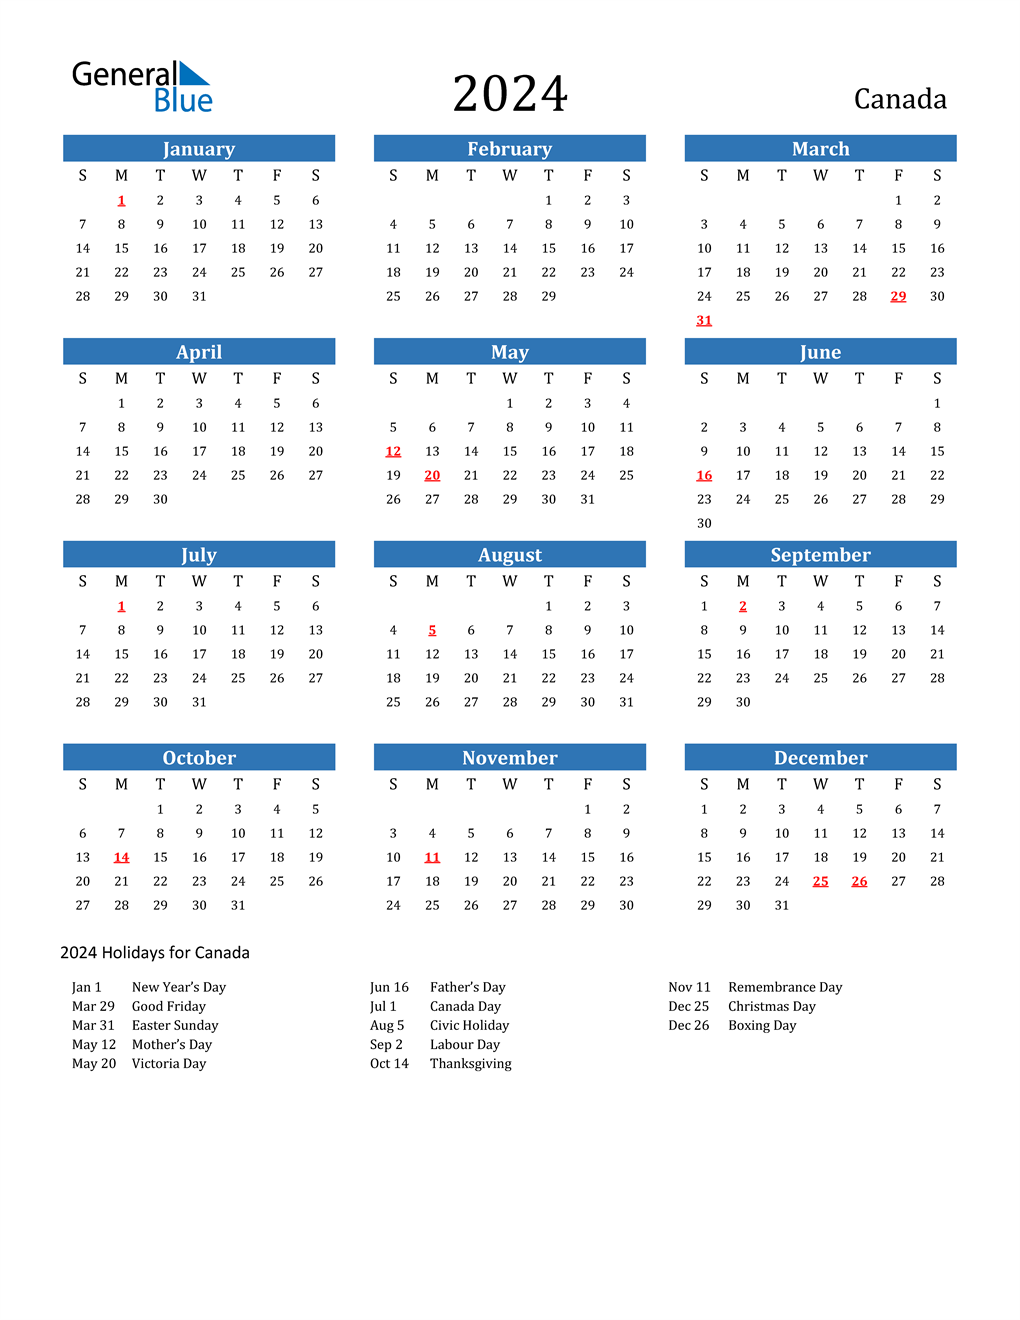 2023 Calendar With Canada Holidays Ms Word Download ZOHAL